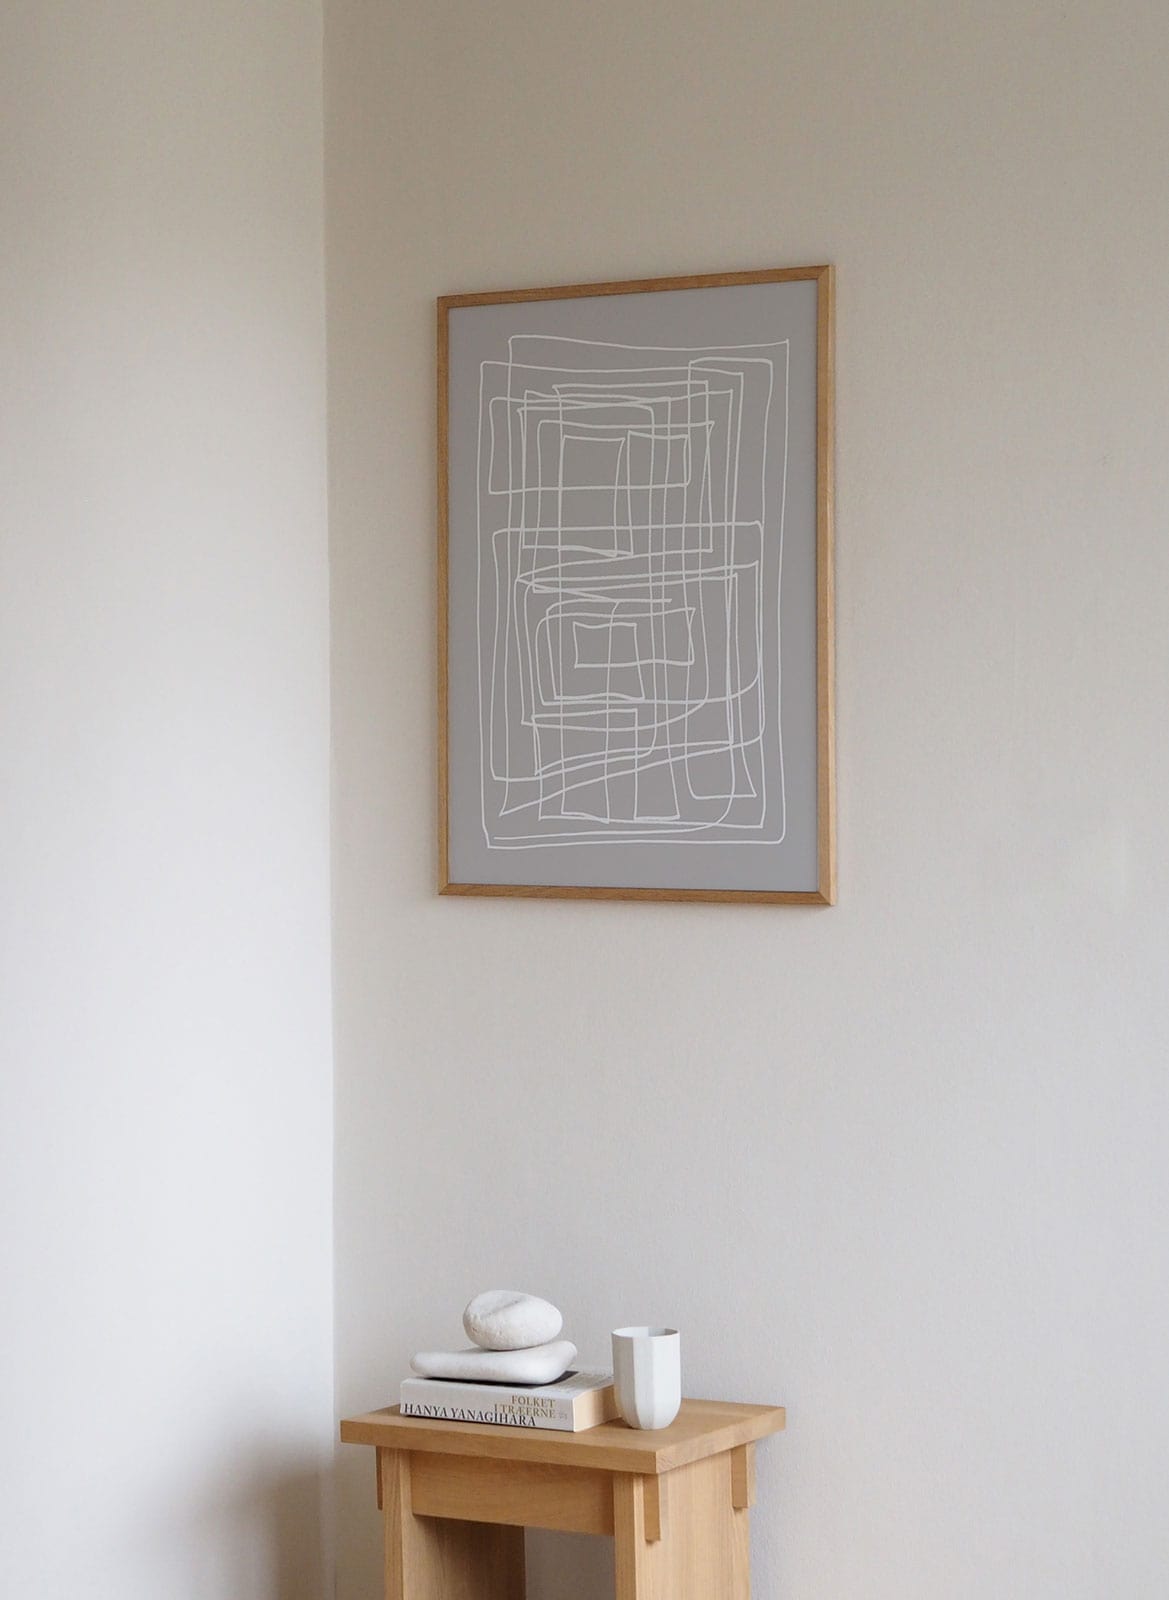 Framed minimalistic posters hanging above a desk/table by Atelier Cph